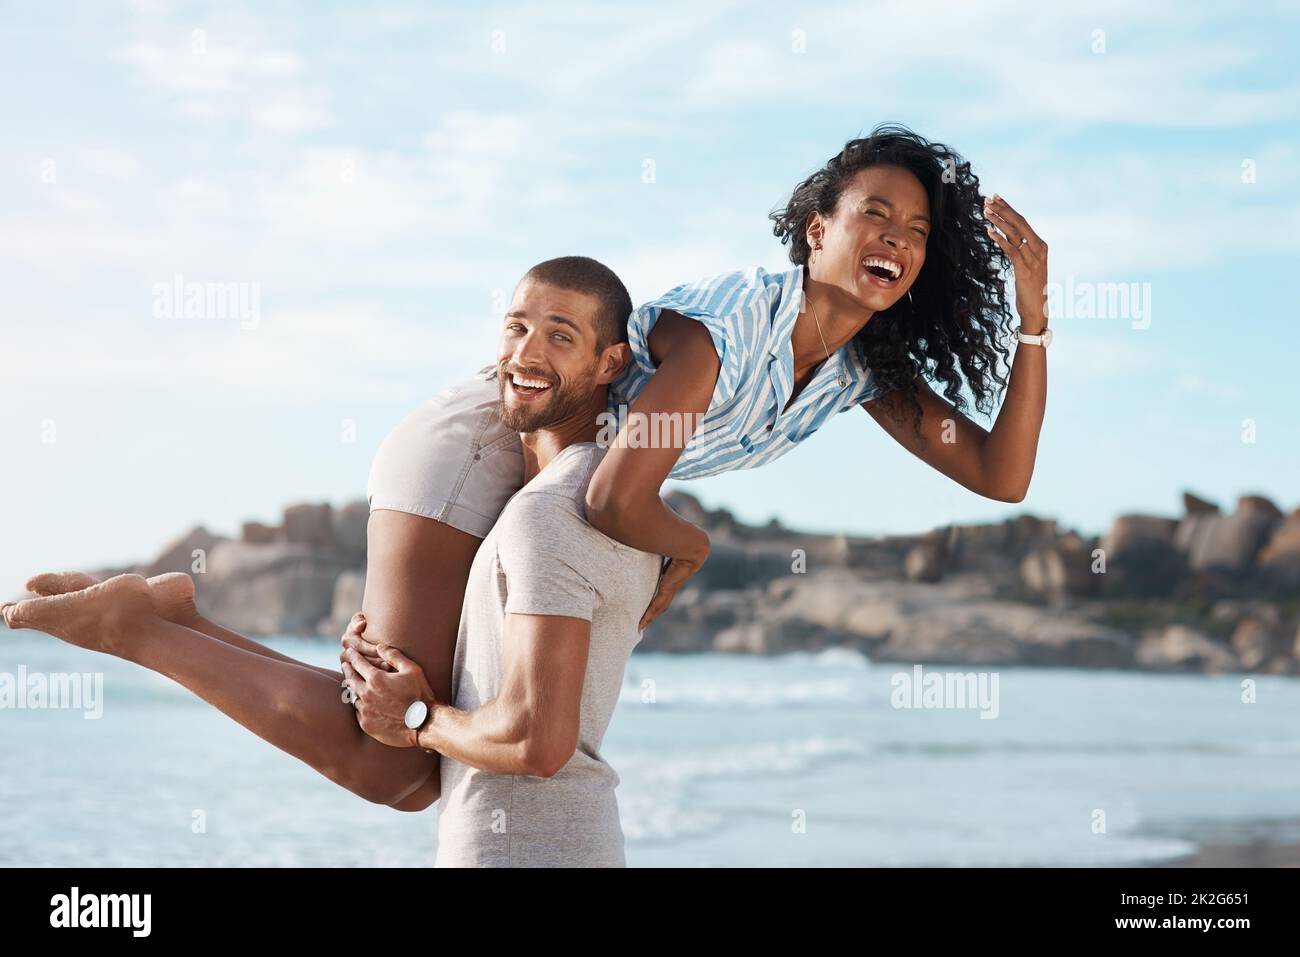 Summer fuels a sense of endless fun. Shot of a young couple enjoying some quality time together at the beach. Stock Photo